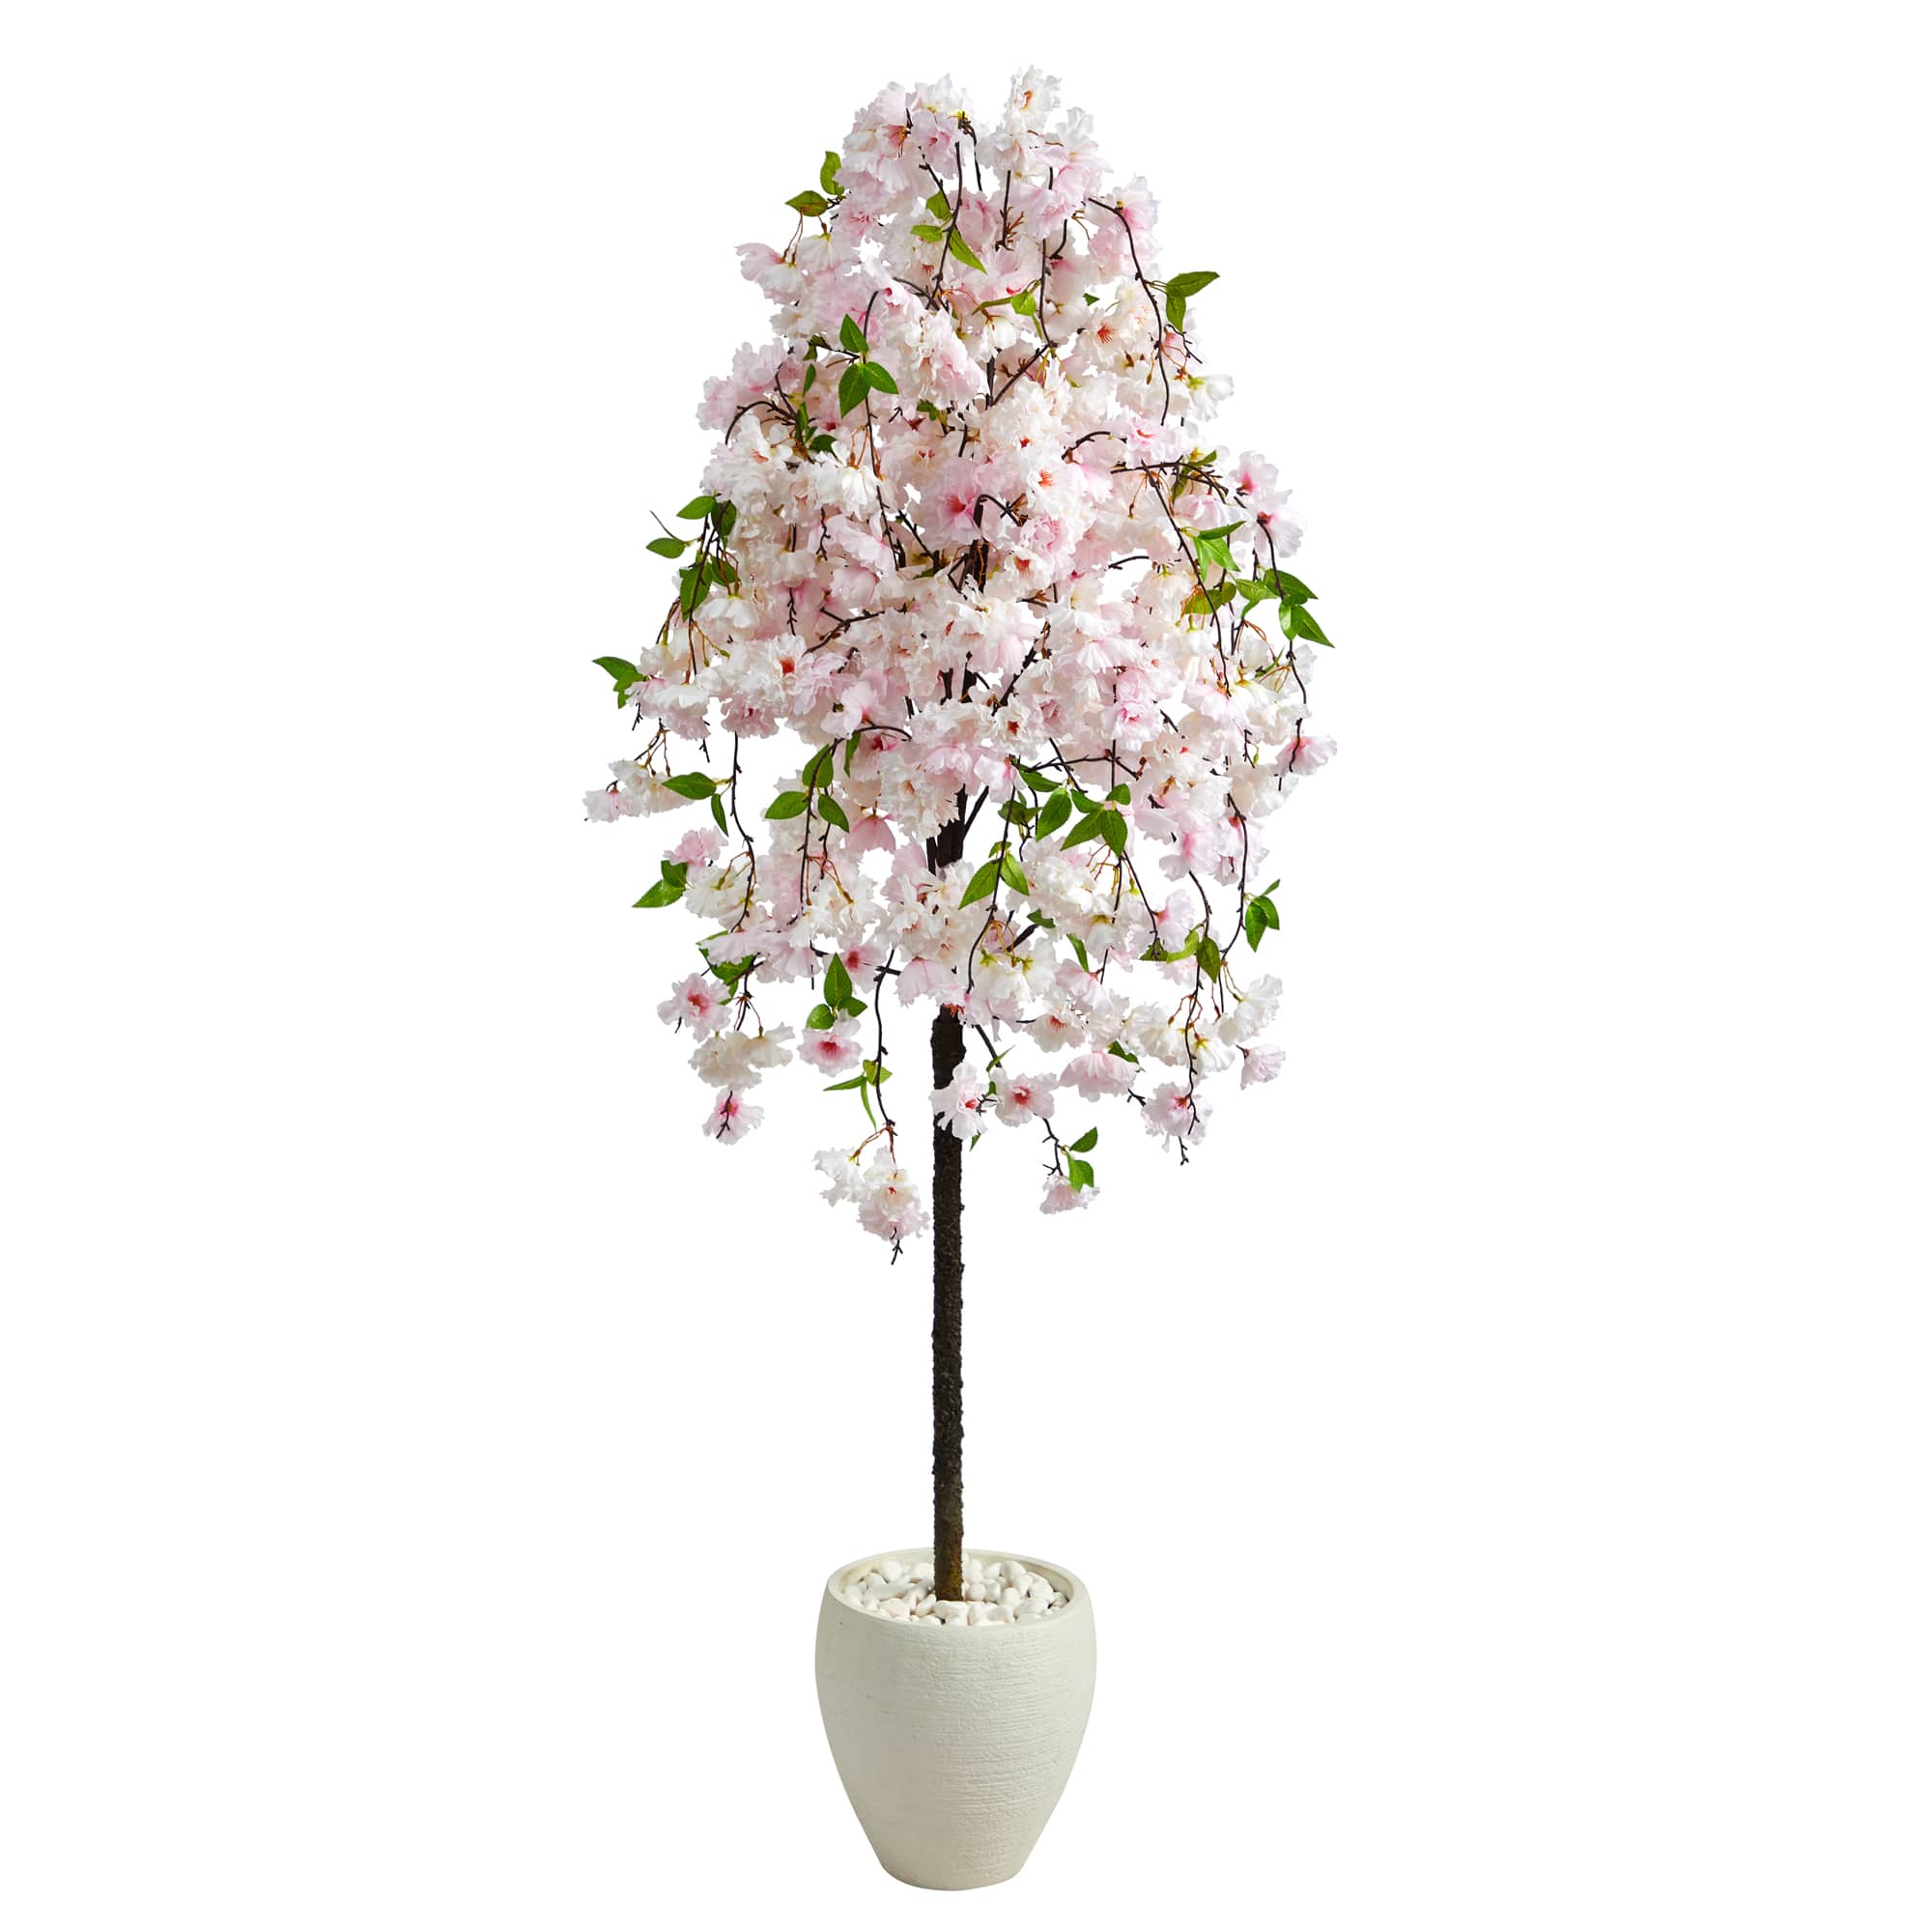 6ft. Cherry Blossom Artificial Tree in White Planter